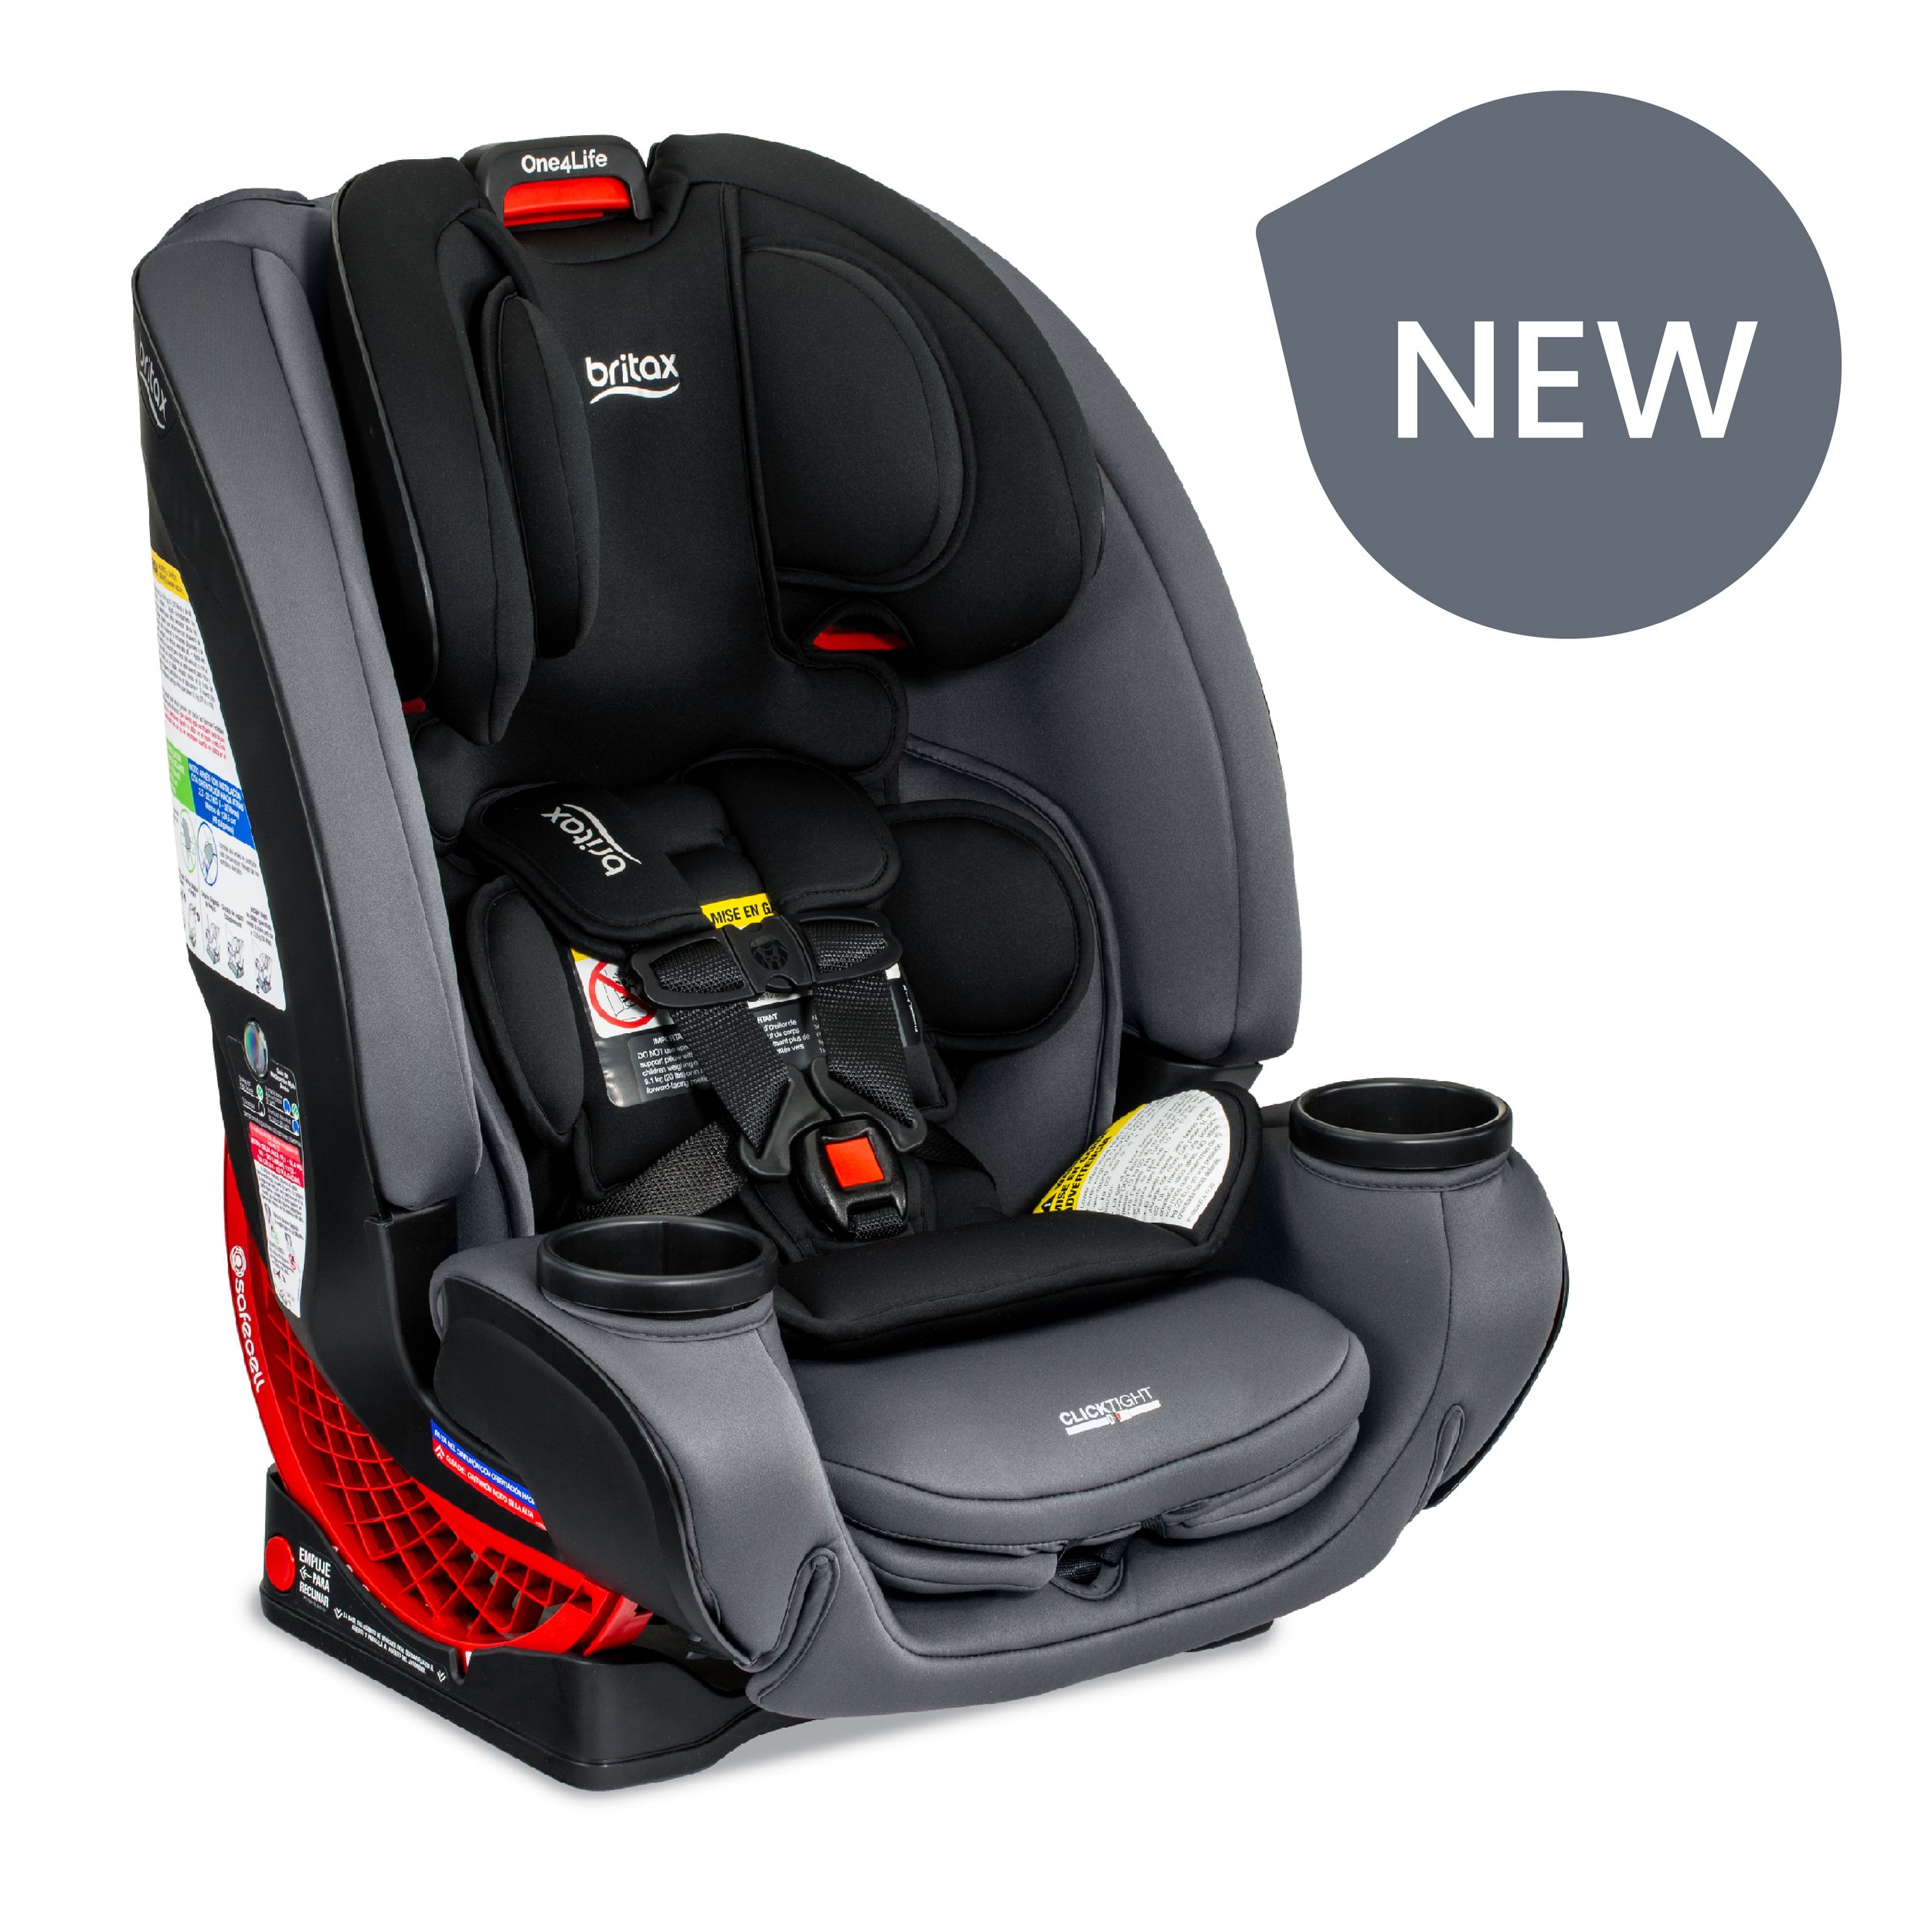 New Stone Onyx Fashion for One4Life Car Seat